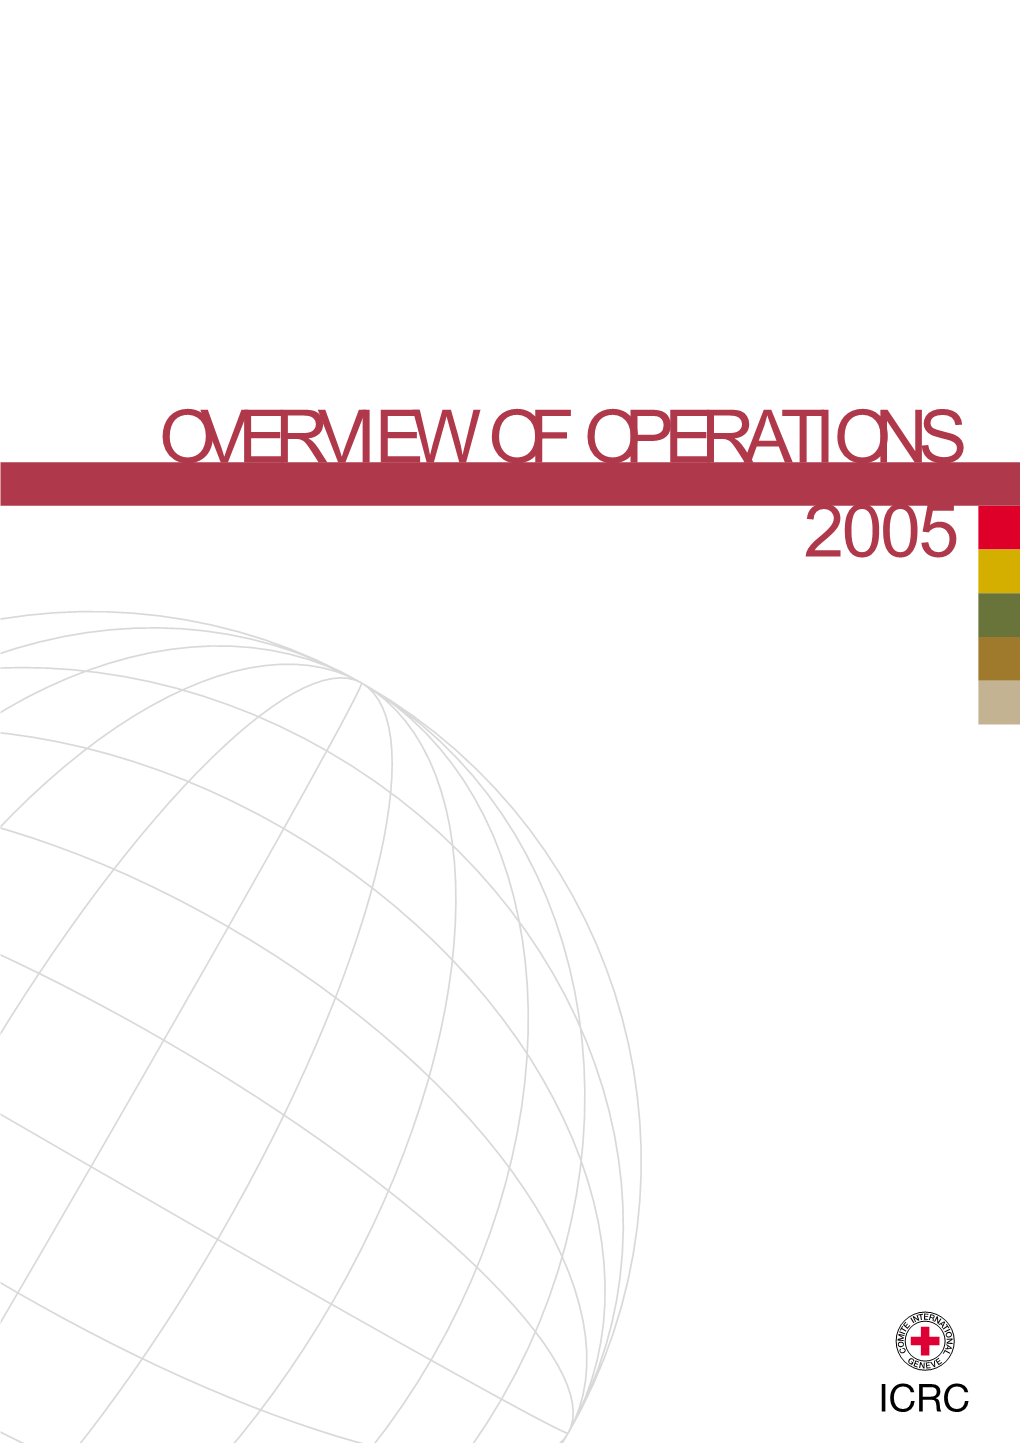 OVERVIEW of OPERATIONS 2005 This Document Supplements the ICRC’S Headquarters Appeal 2005 and Contains